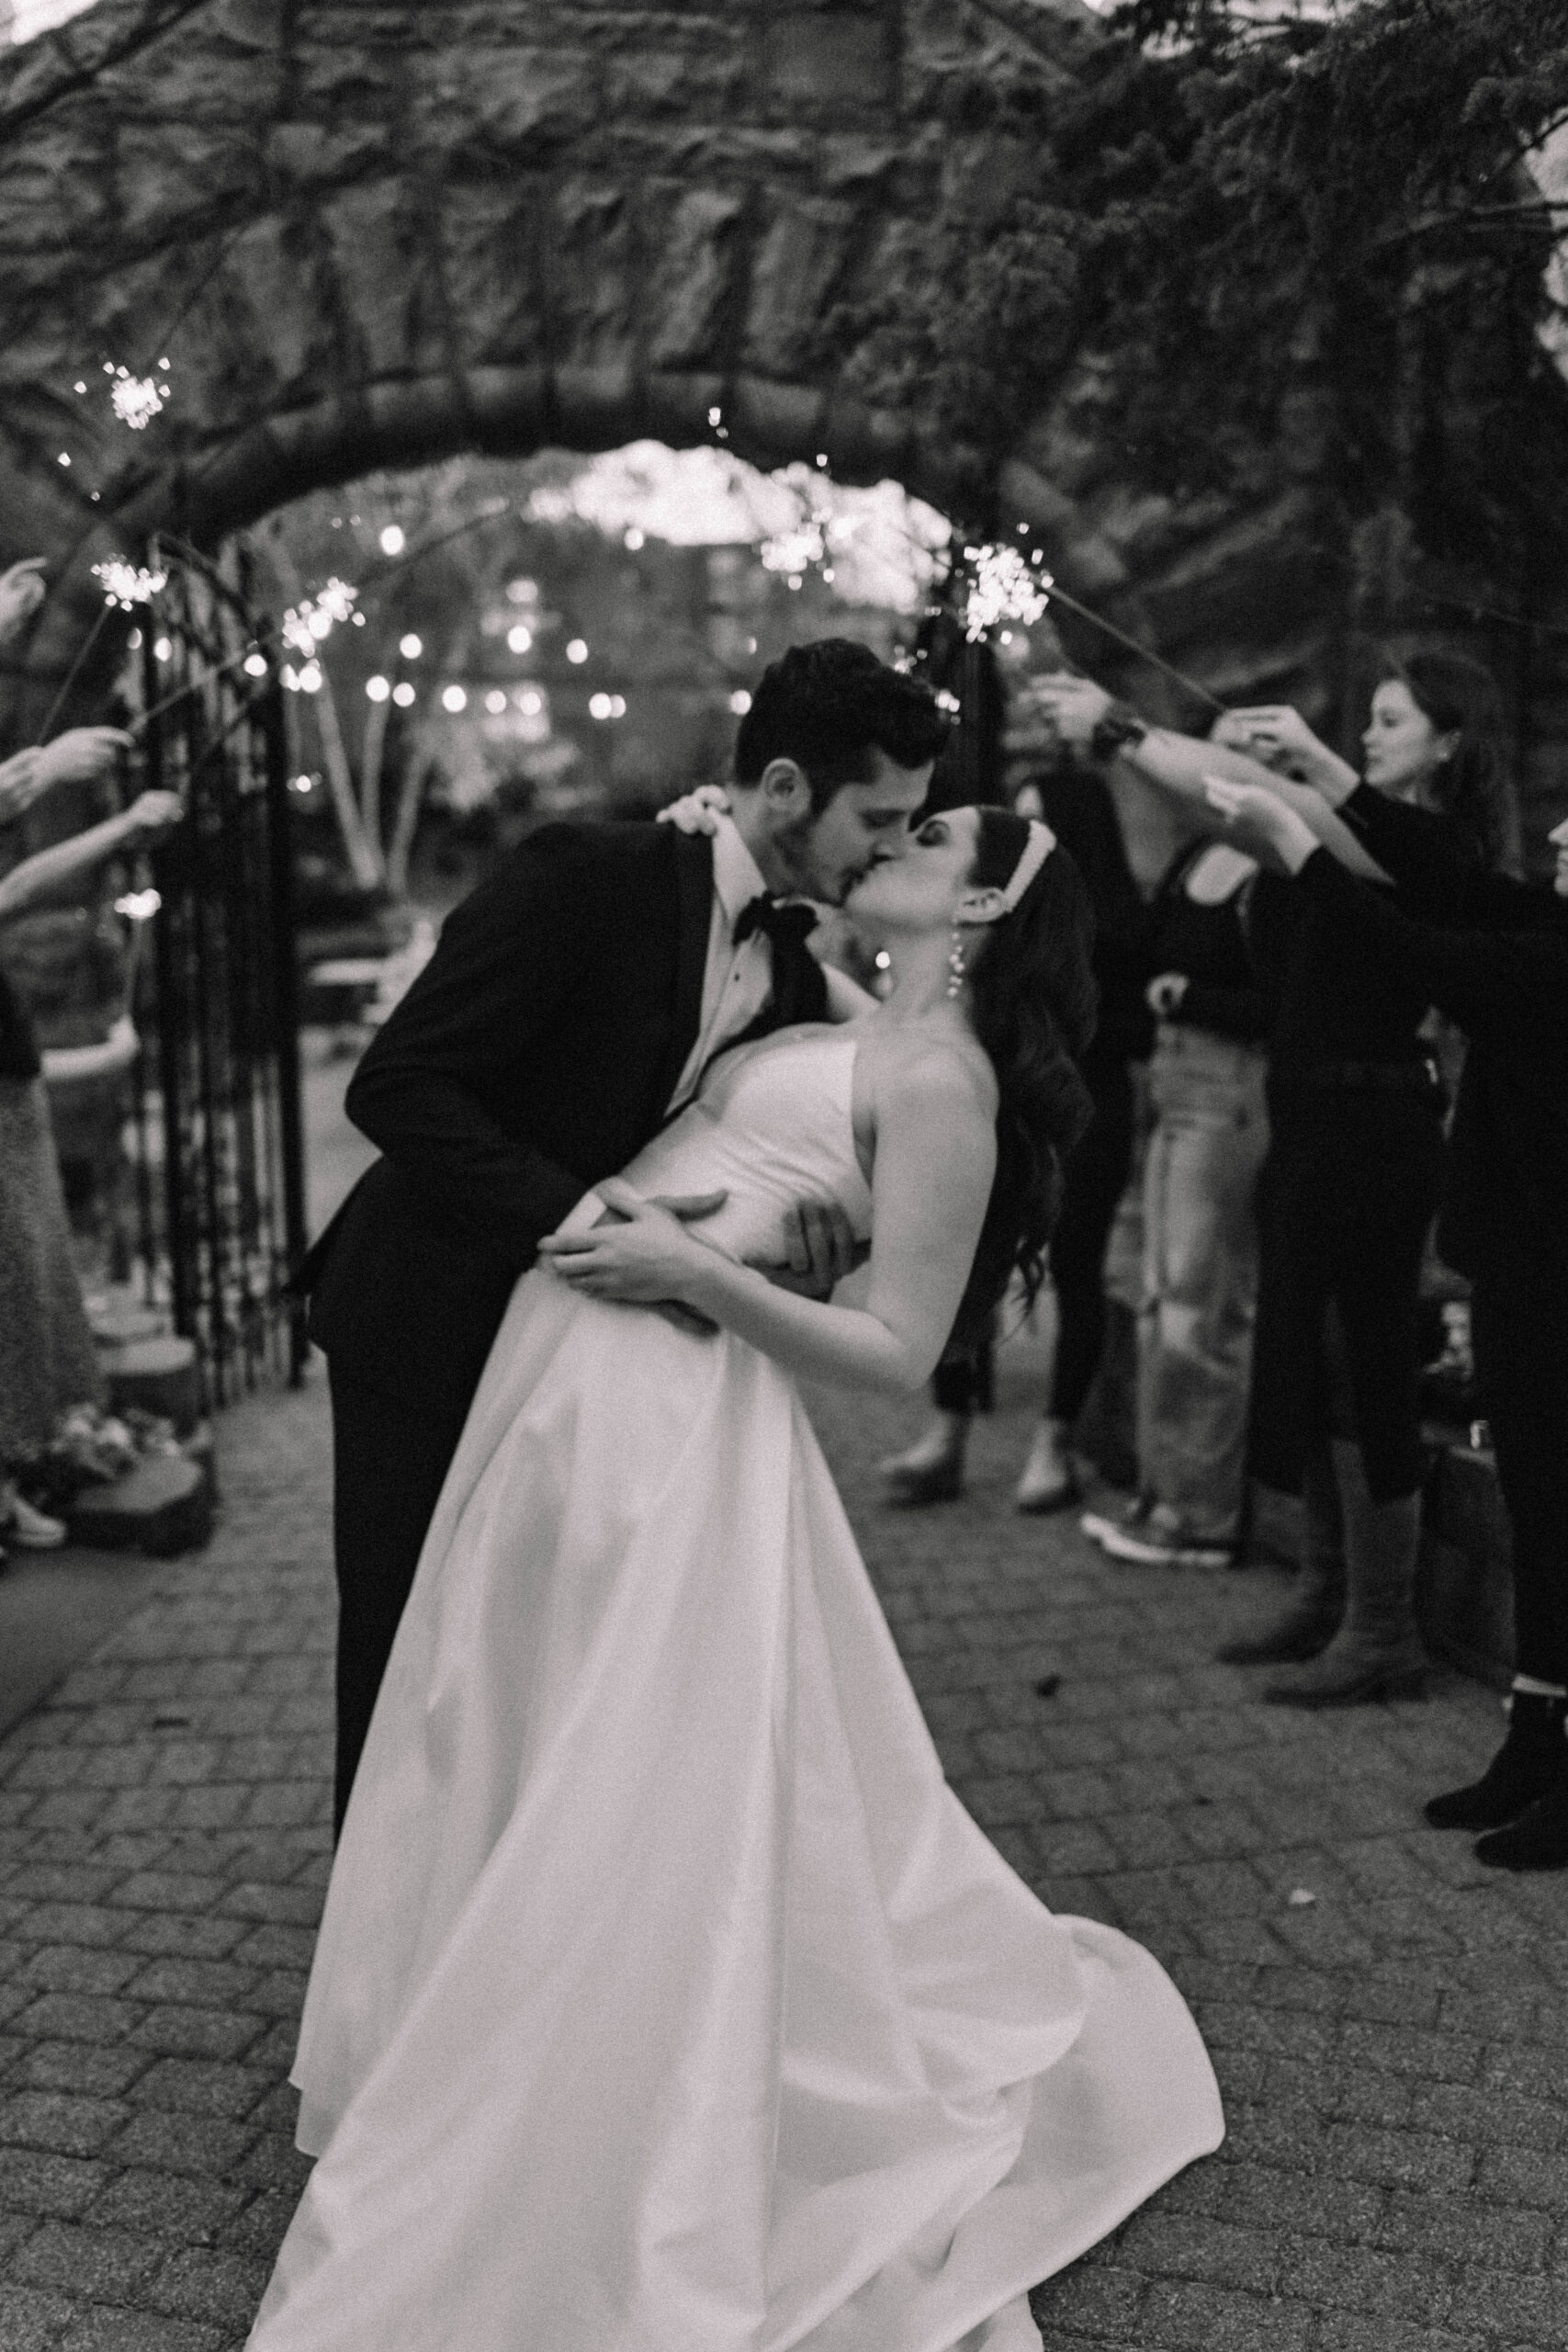 Bride and groom kissing between a tunnel of people holding up sparklers